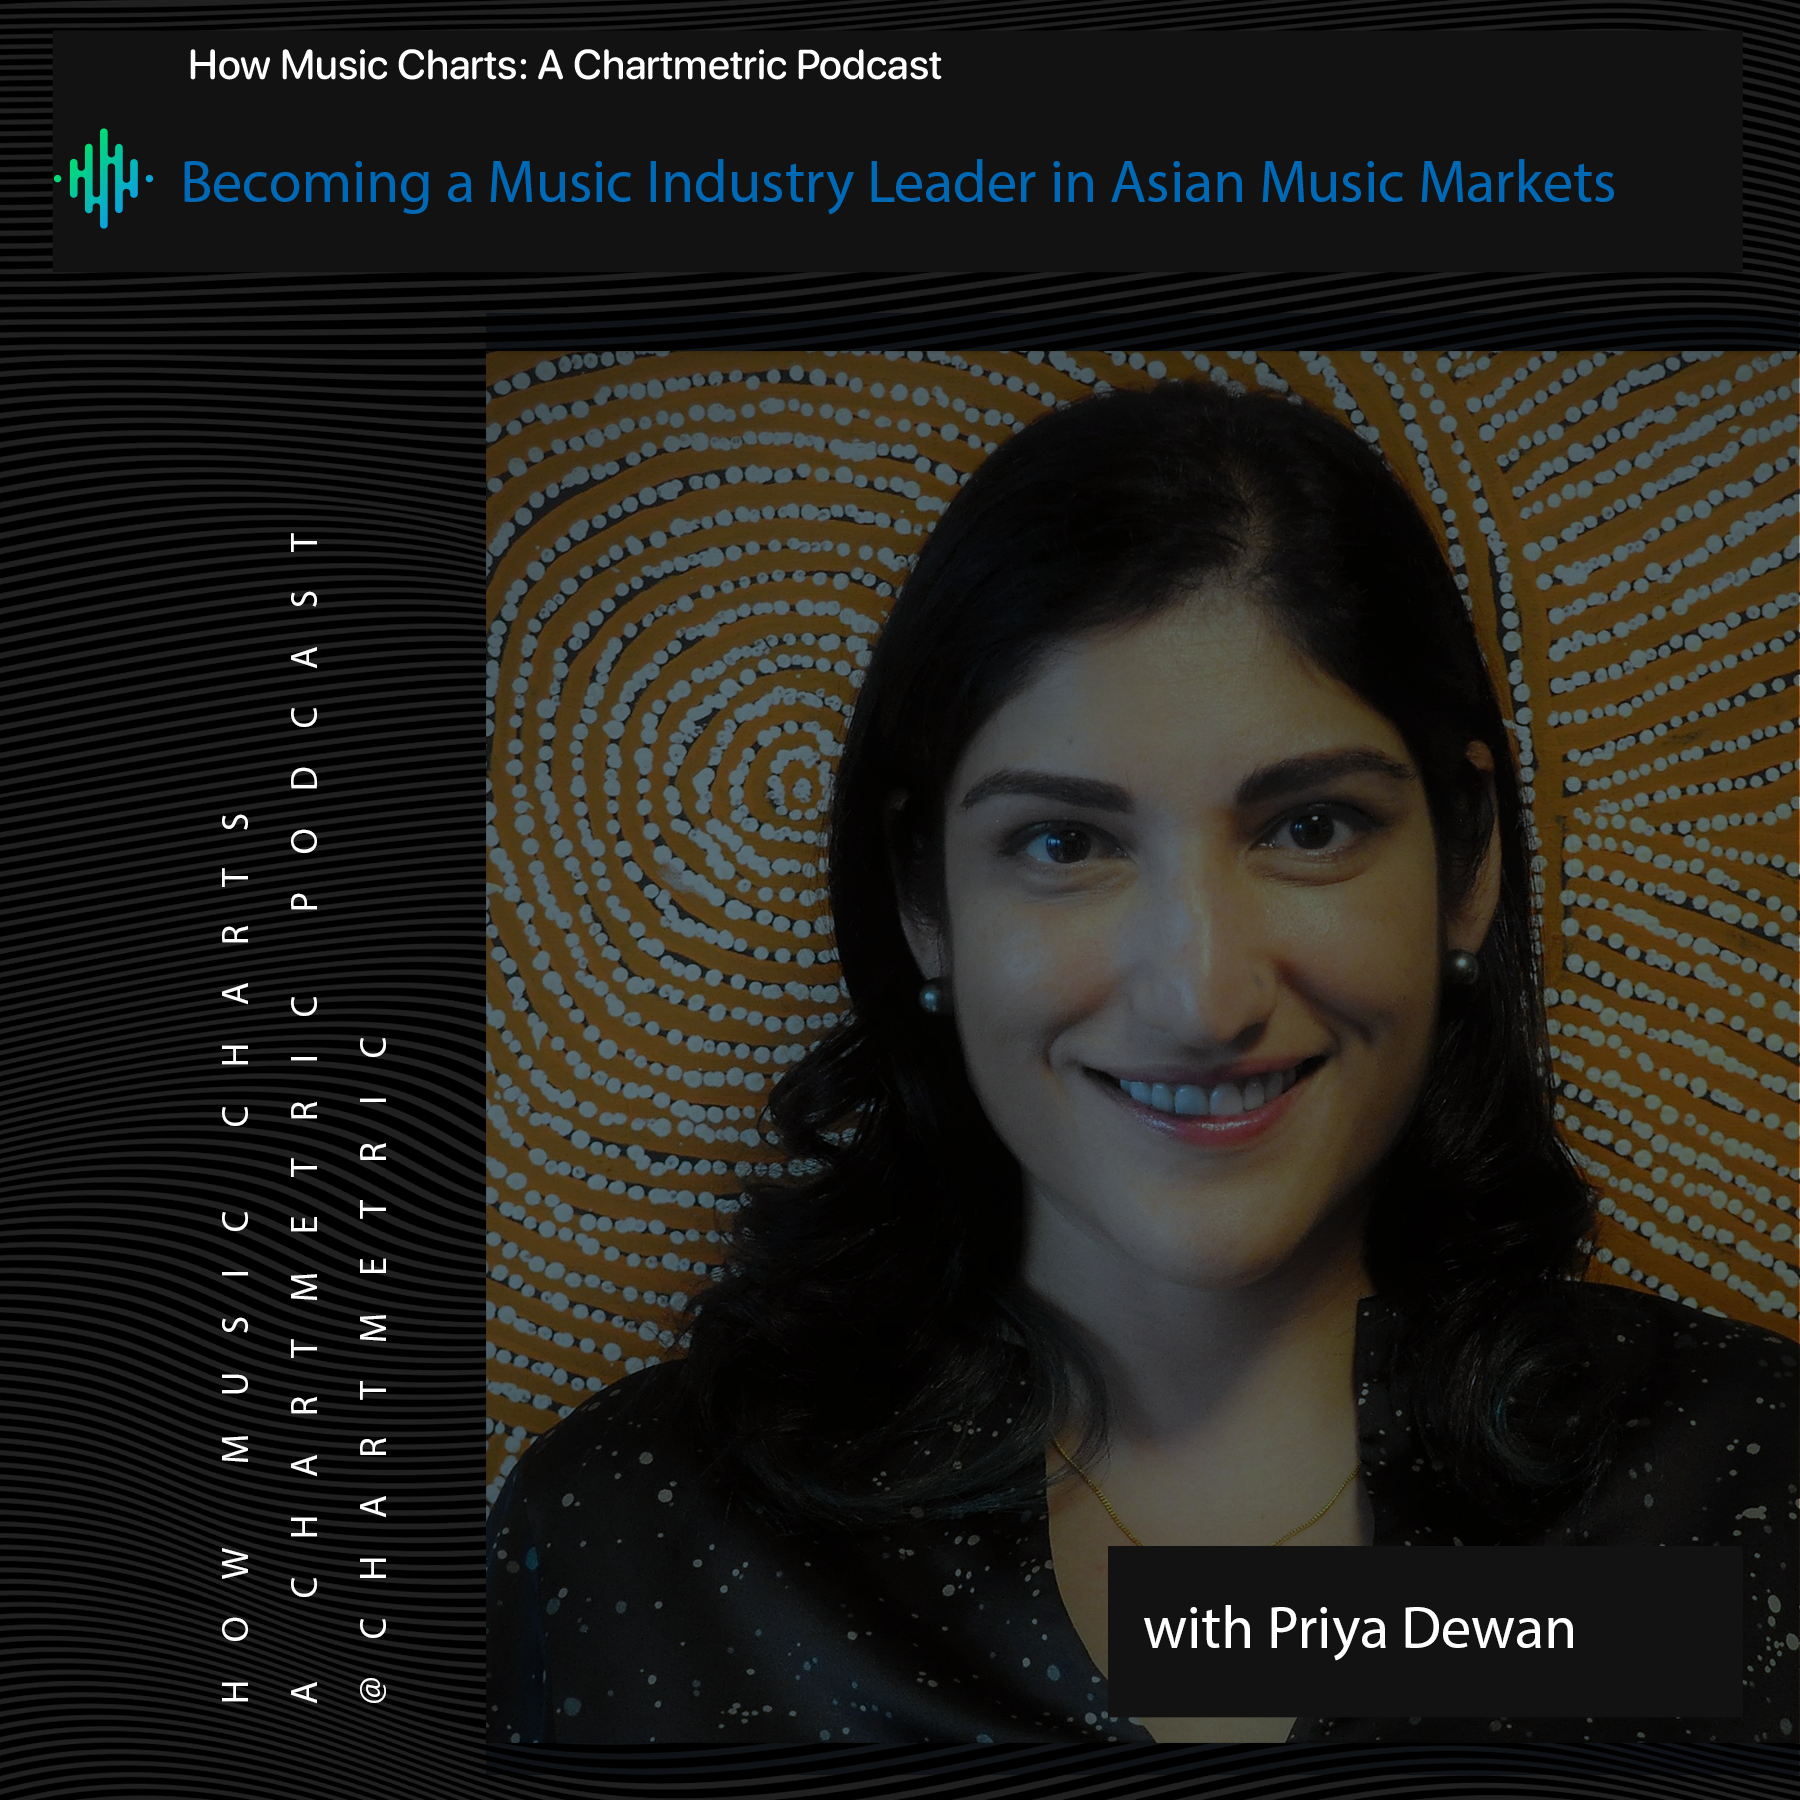 Becoming a Music Industry Leader in Asian Music Markets With Priya Dewan